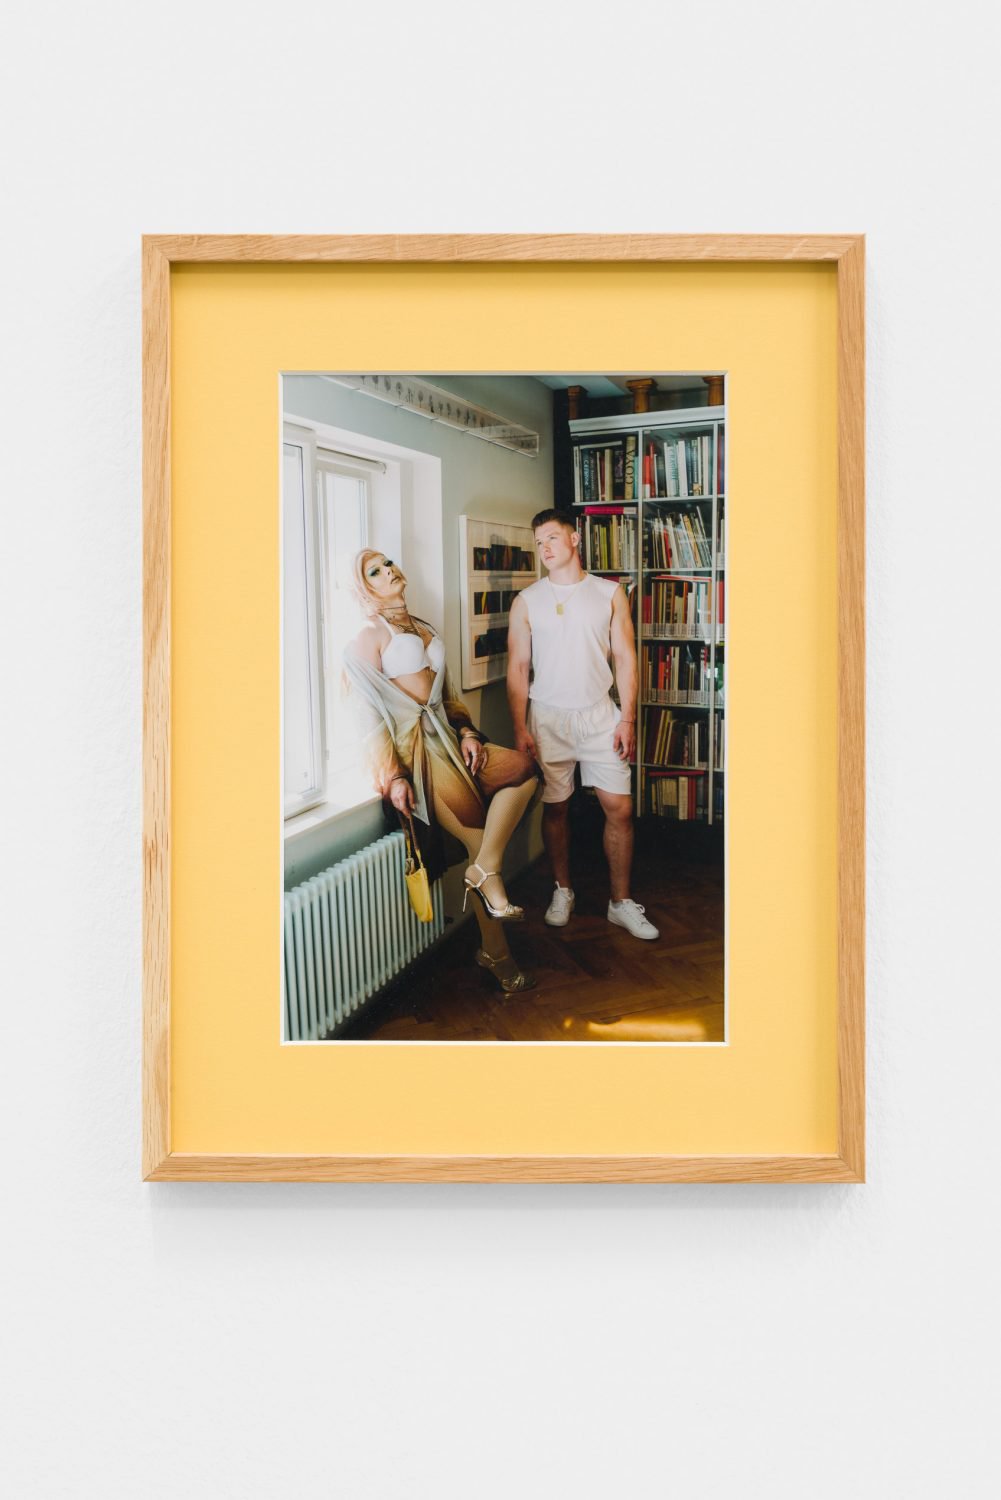 Philipp TimischlArtworks for All Age Groups, 2018C-print, framed with custom passepartout40 x 30 cm